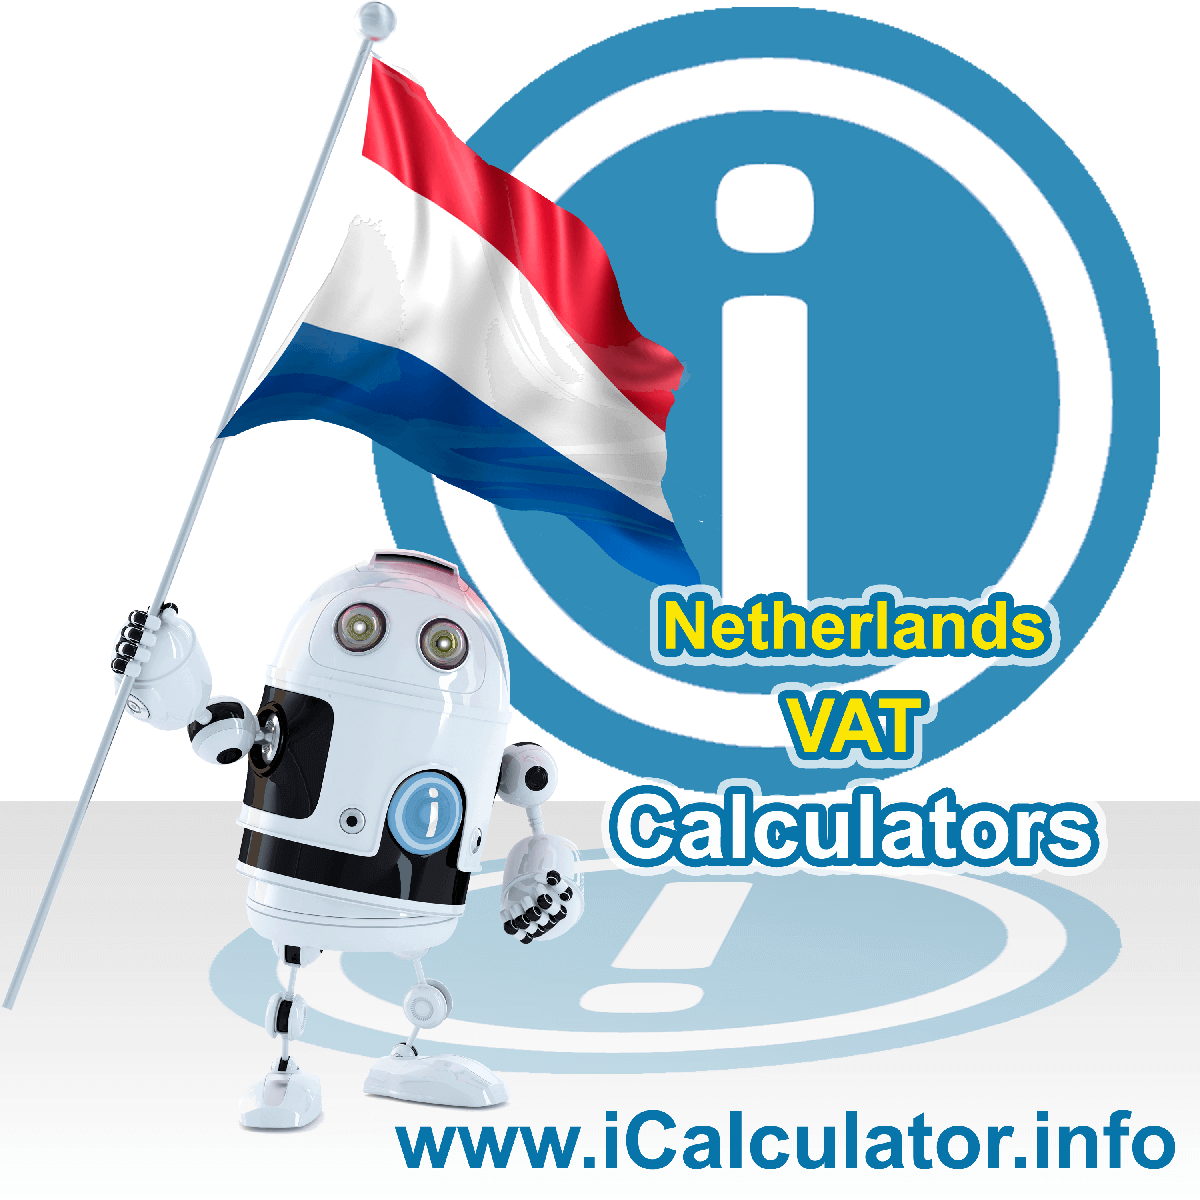 Netherlands VAT Calculator. This image shows the Netherlands flag and information relating to the VAT formula used for calculating Value Added Tax in the Netherlands using the Netherlands VAT Calculator in 2023